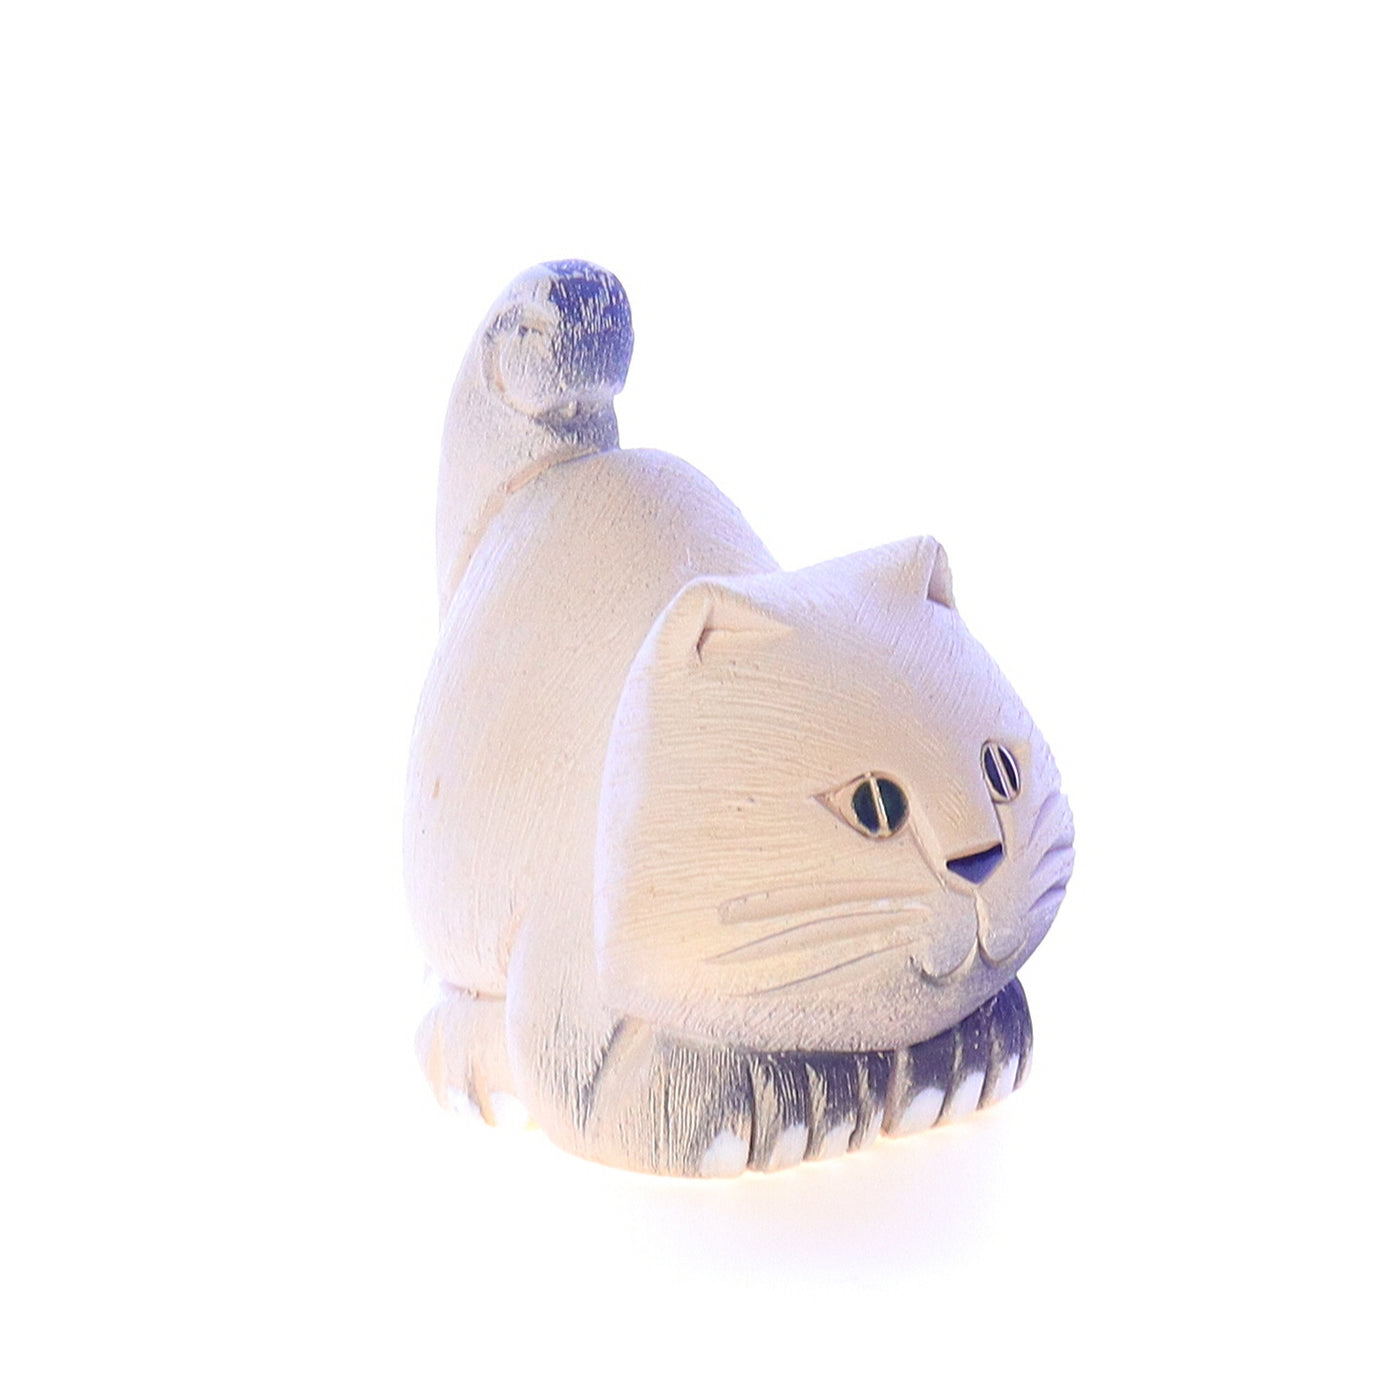 Artesania_Rinconada_White_Cat_with_Black_Eyes_Cat_Figurine_1970 Front Right View